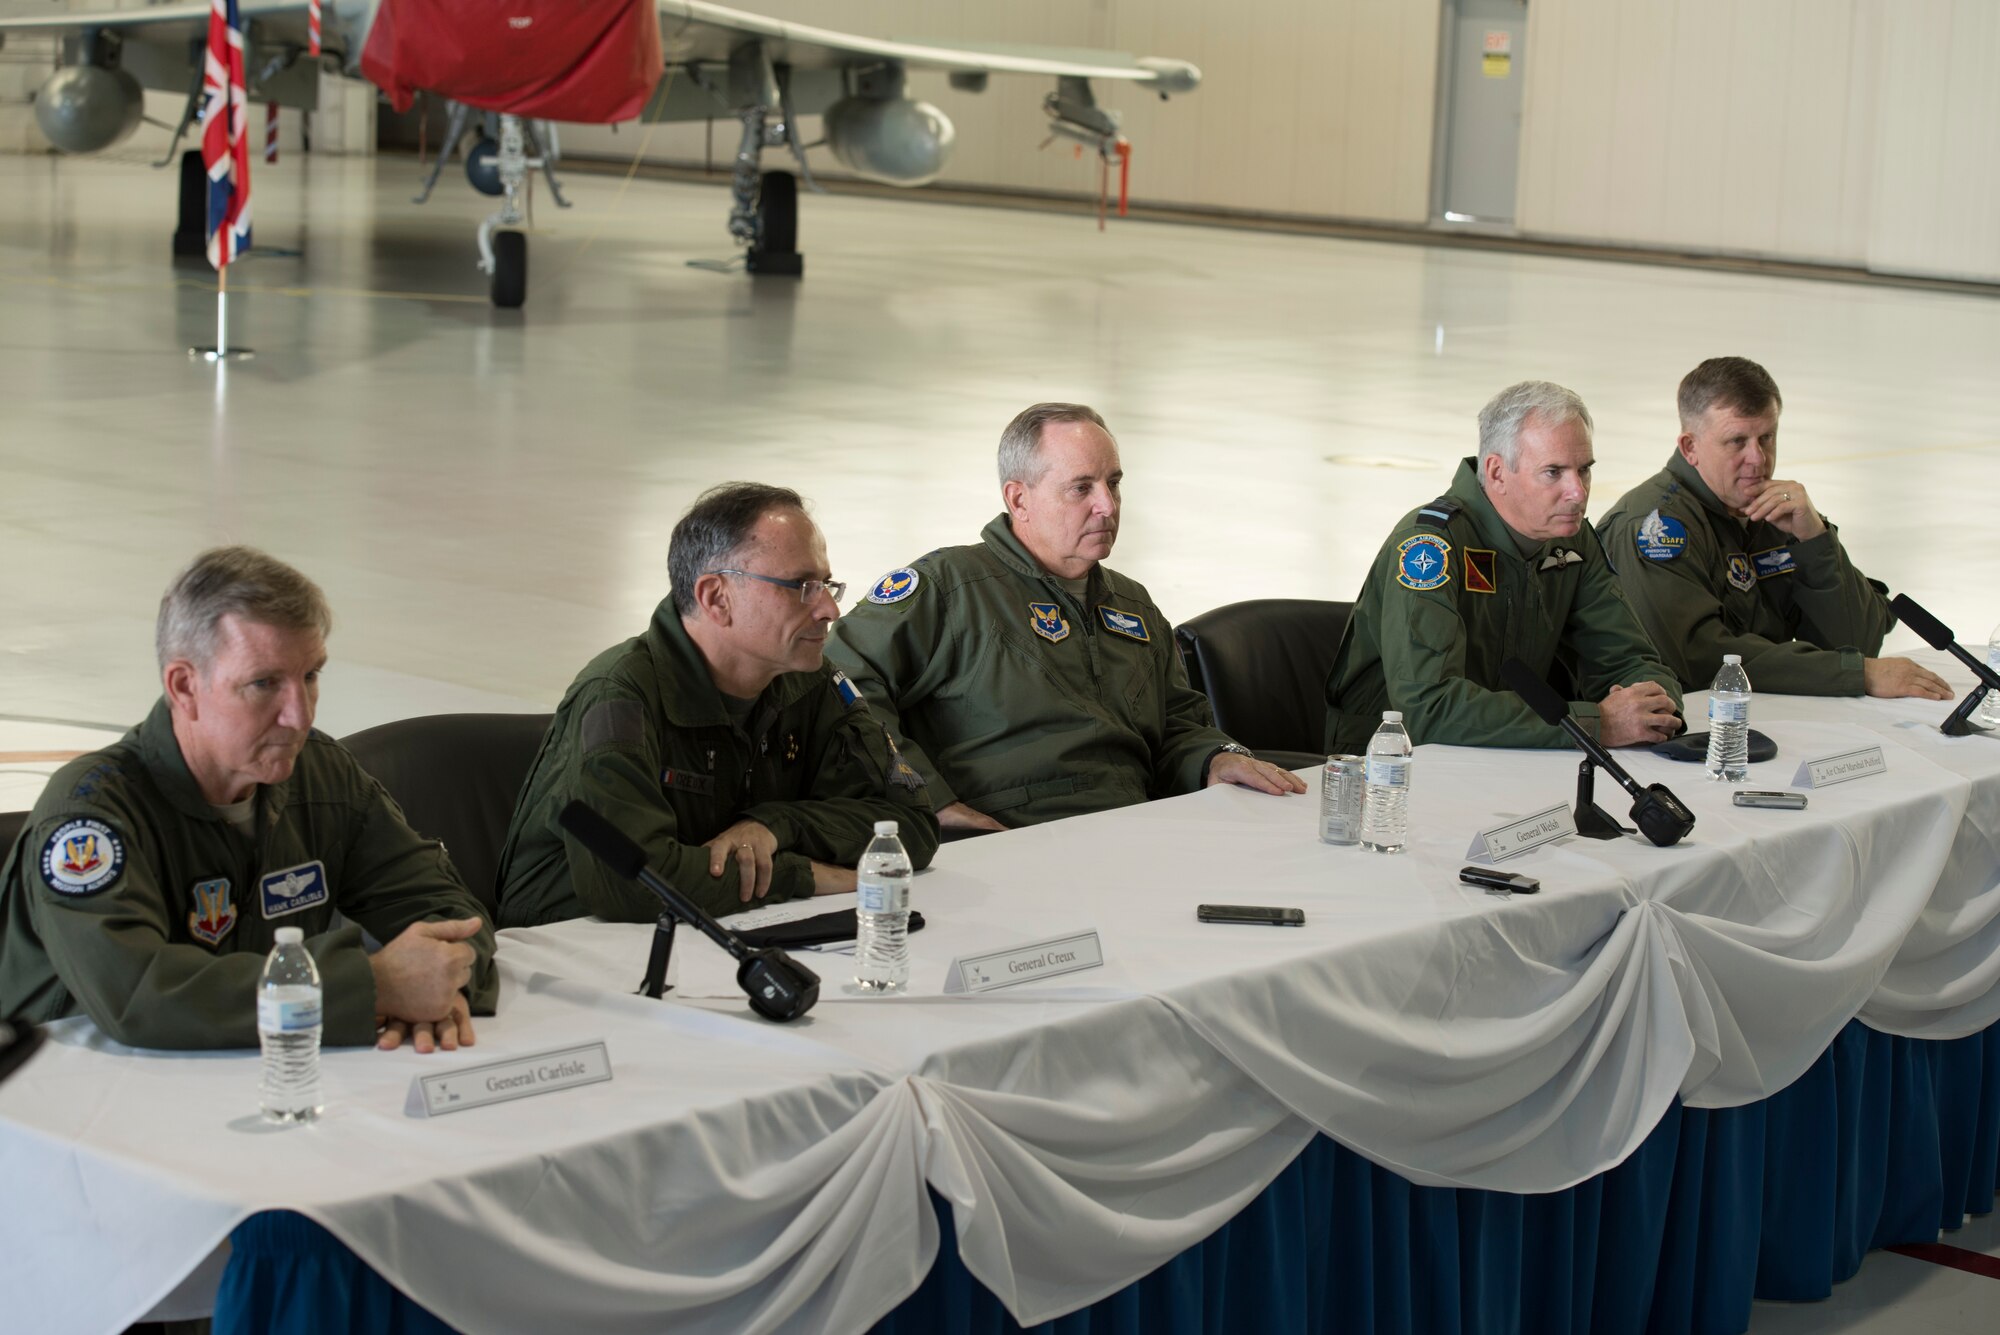 From left, U.S. Air Force Gen. Hawk Carlisle, commander of Air Combat Command, French air force Deputy Chief of the Air Staff Gen. Antoine Creux, Chief of Staff of the U.S. Air Force Gen. Mark A. Welsh III, British Royal Air Force Chief of the Air Staff, Air Chief Marshall Sir Andrew Pulford, and U.S. Air Force Gen. Frank Gorenc, commander of U.S. Air Forces in Europe (USAFE), answer questions during a press conference hosted during the Trilateral Exercise at Langley Air Force Base, Va., Dec. 15, 2015.  As part of the exercise, Pulford, Welsh, Creux and Gorenc hosted a press conference to discuss the importance of working together as coalition forces.  (U.S. Air Force photo by Tech. Sgt. Katie Gar Ward)